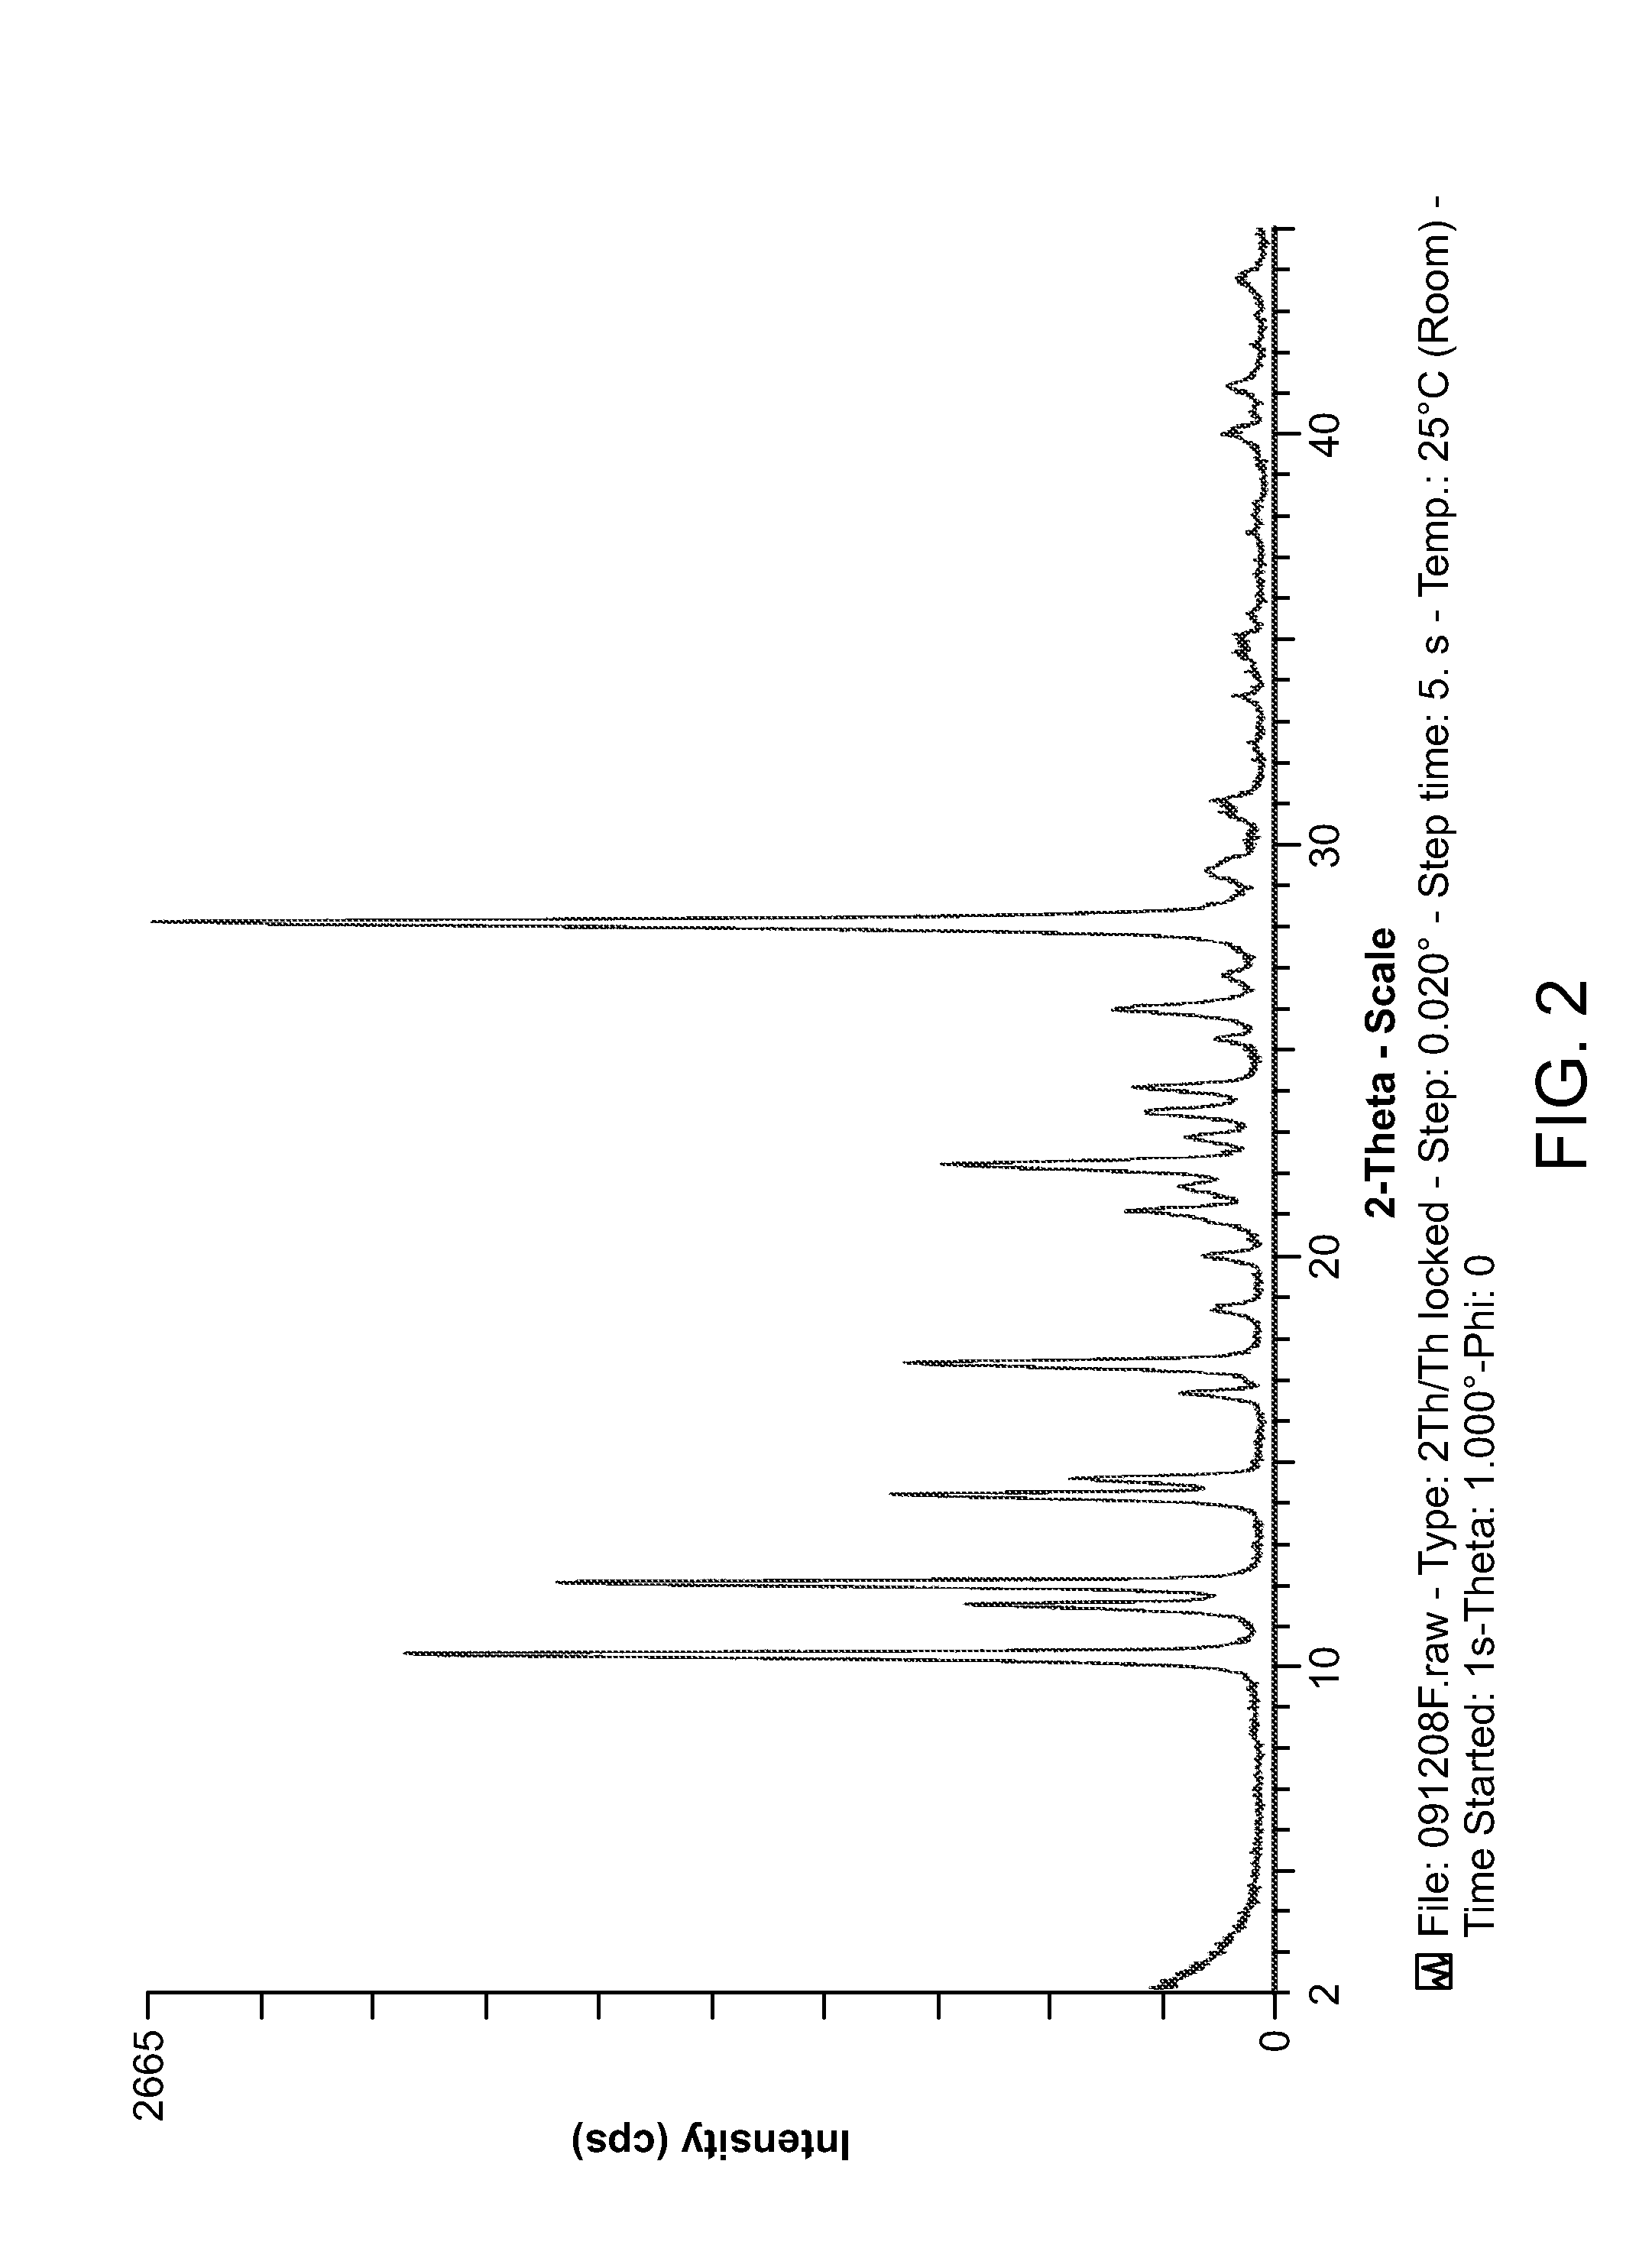 Novel compounds and compositions for targeting cancer stem cells